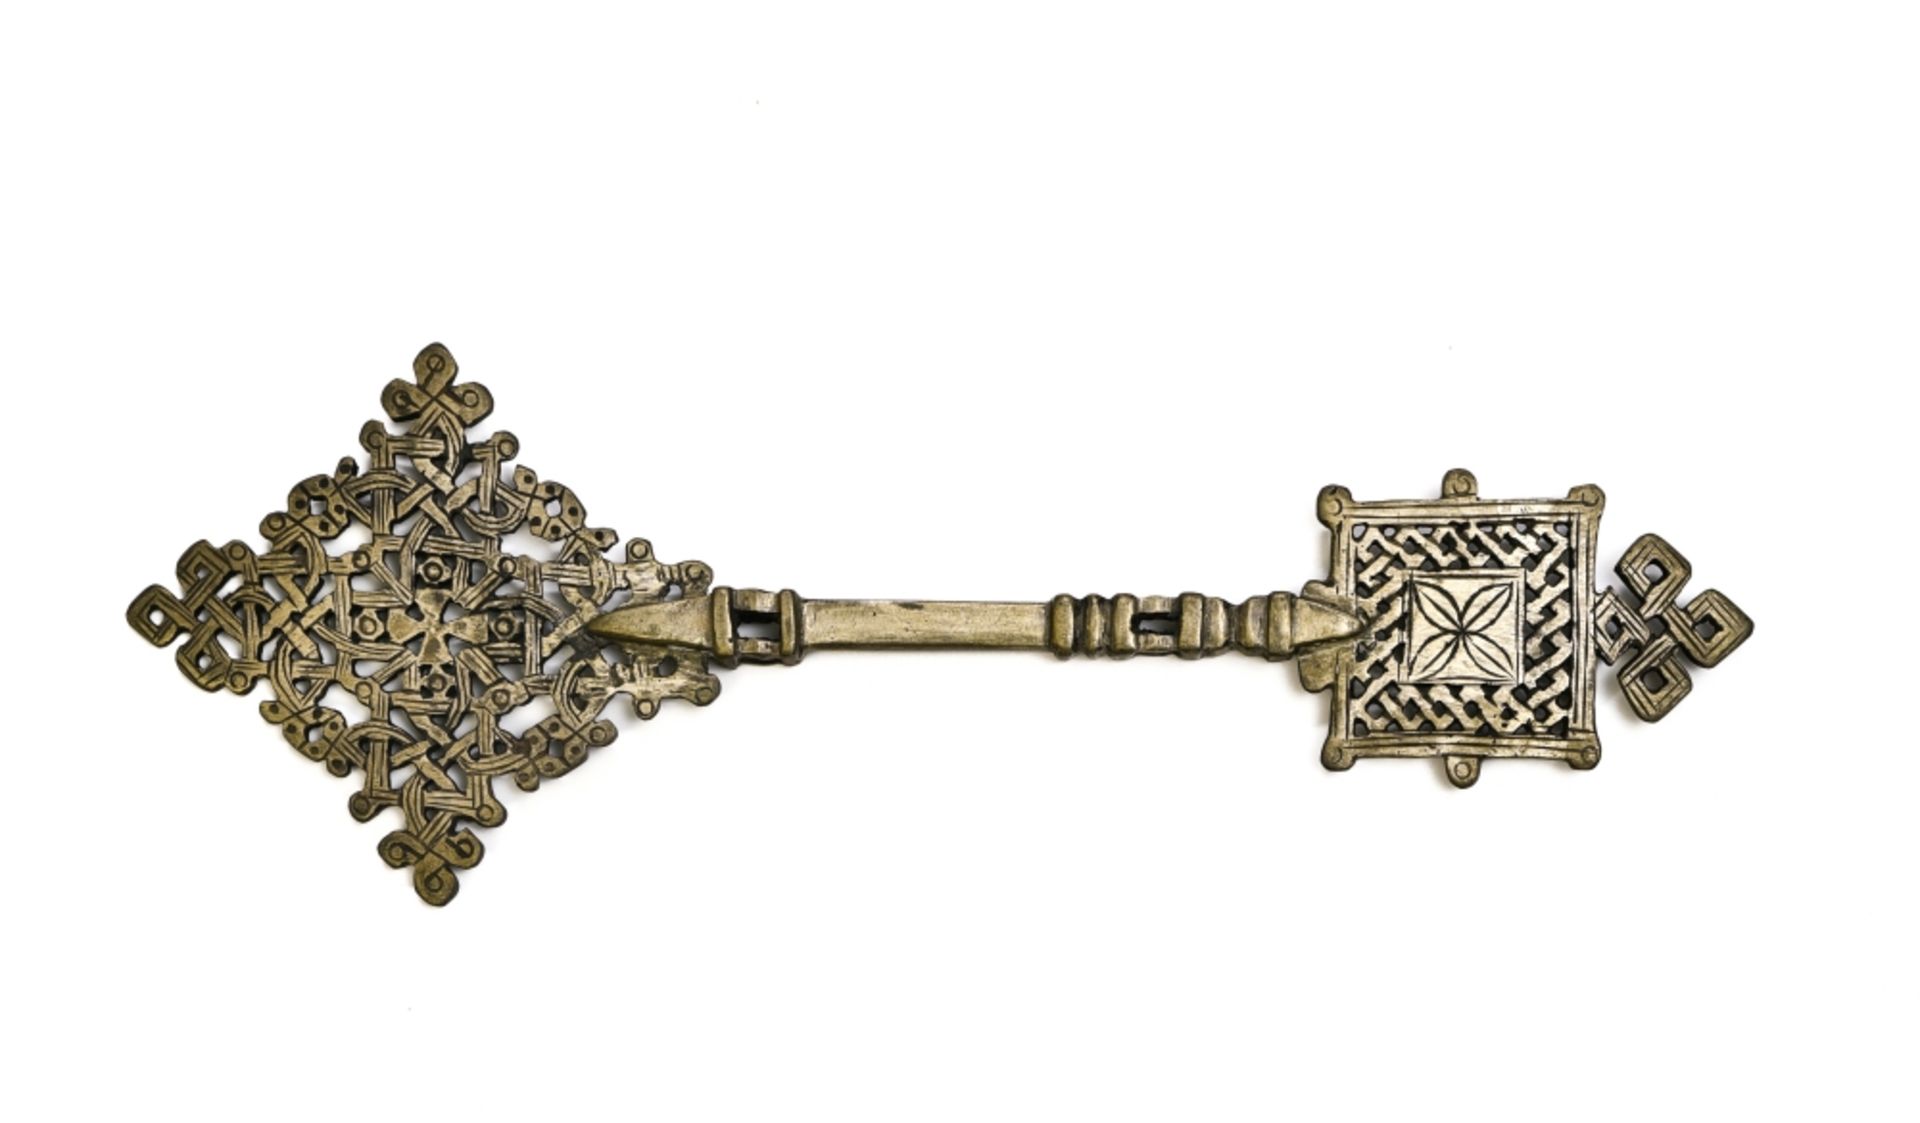 Coptic cross for processions ETHIOPIA, CA. 1900 silver-plated bronze H : 30,5 cm Width : 10,5 cm - Image 3 of 3